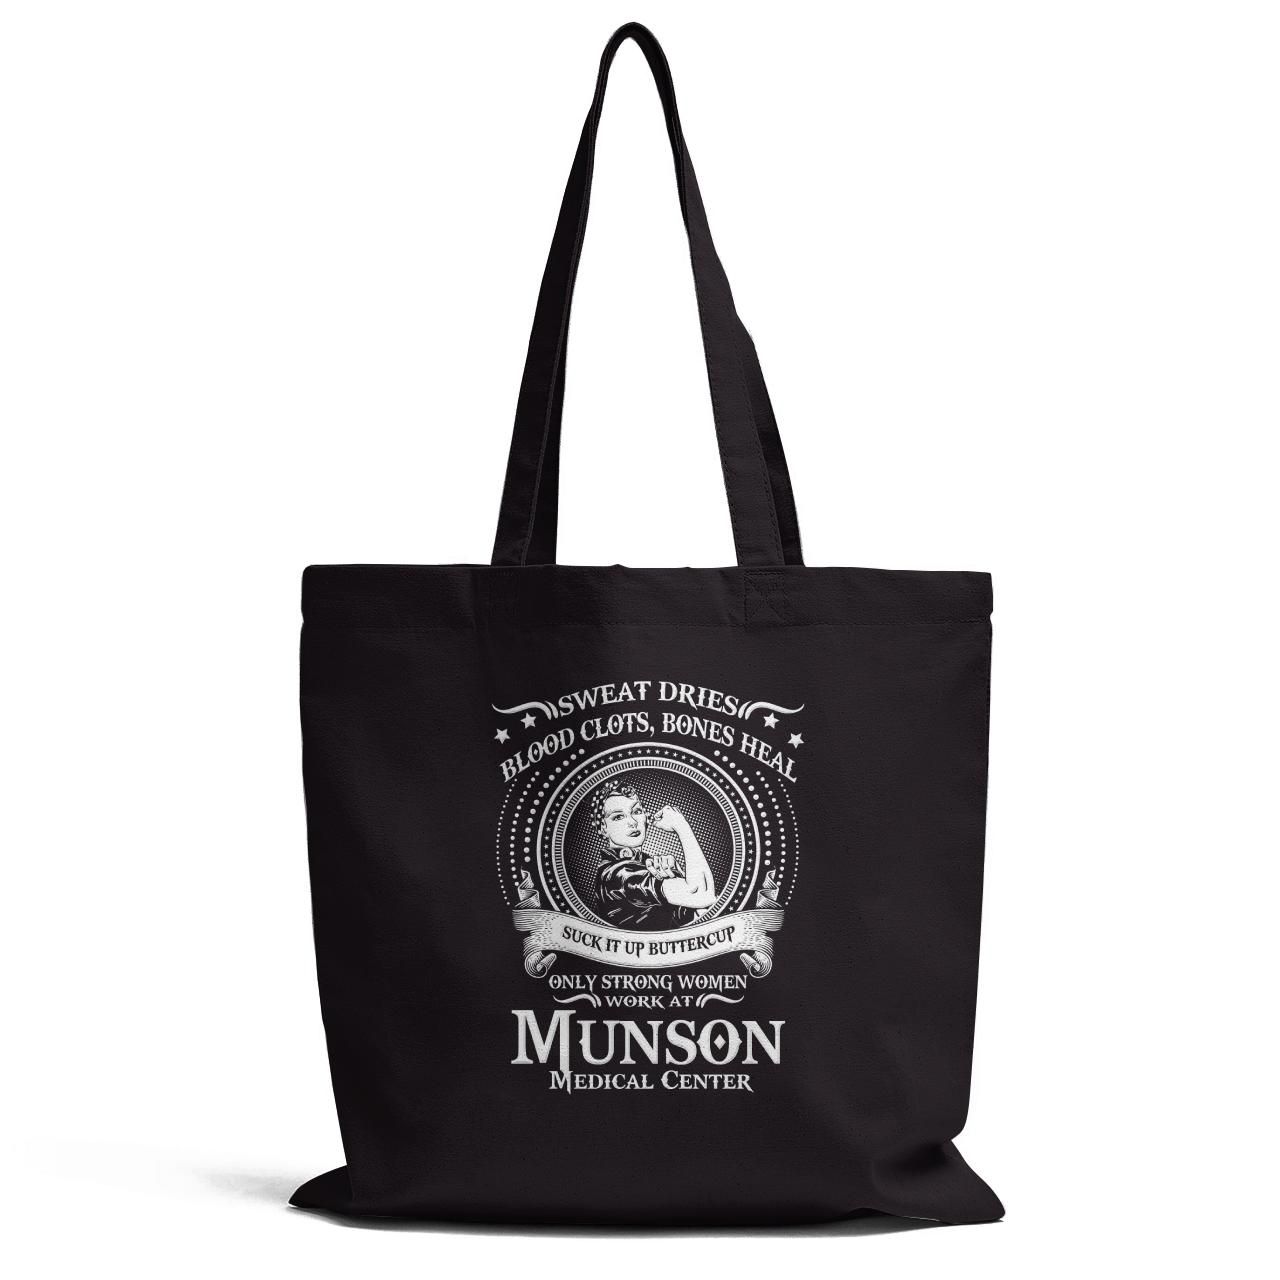 Only Strong Women Work At Munson Medical Canter Tote Bag